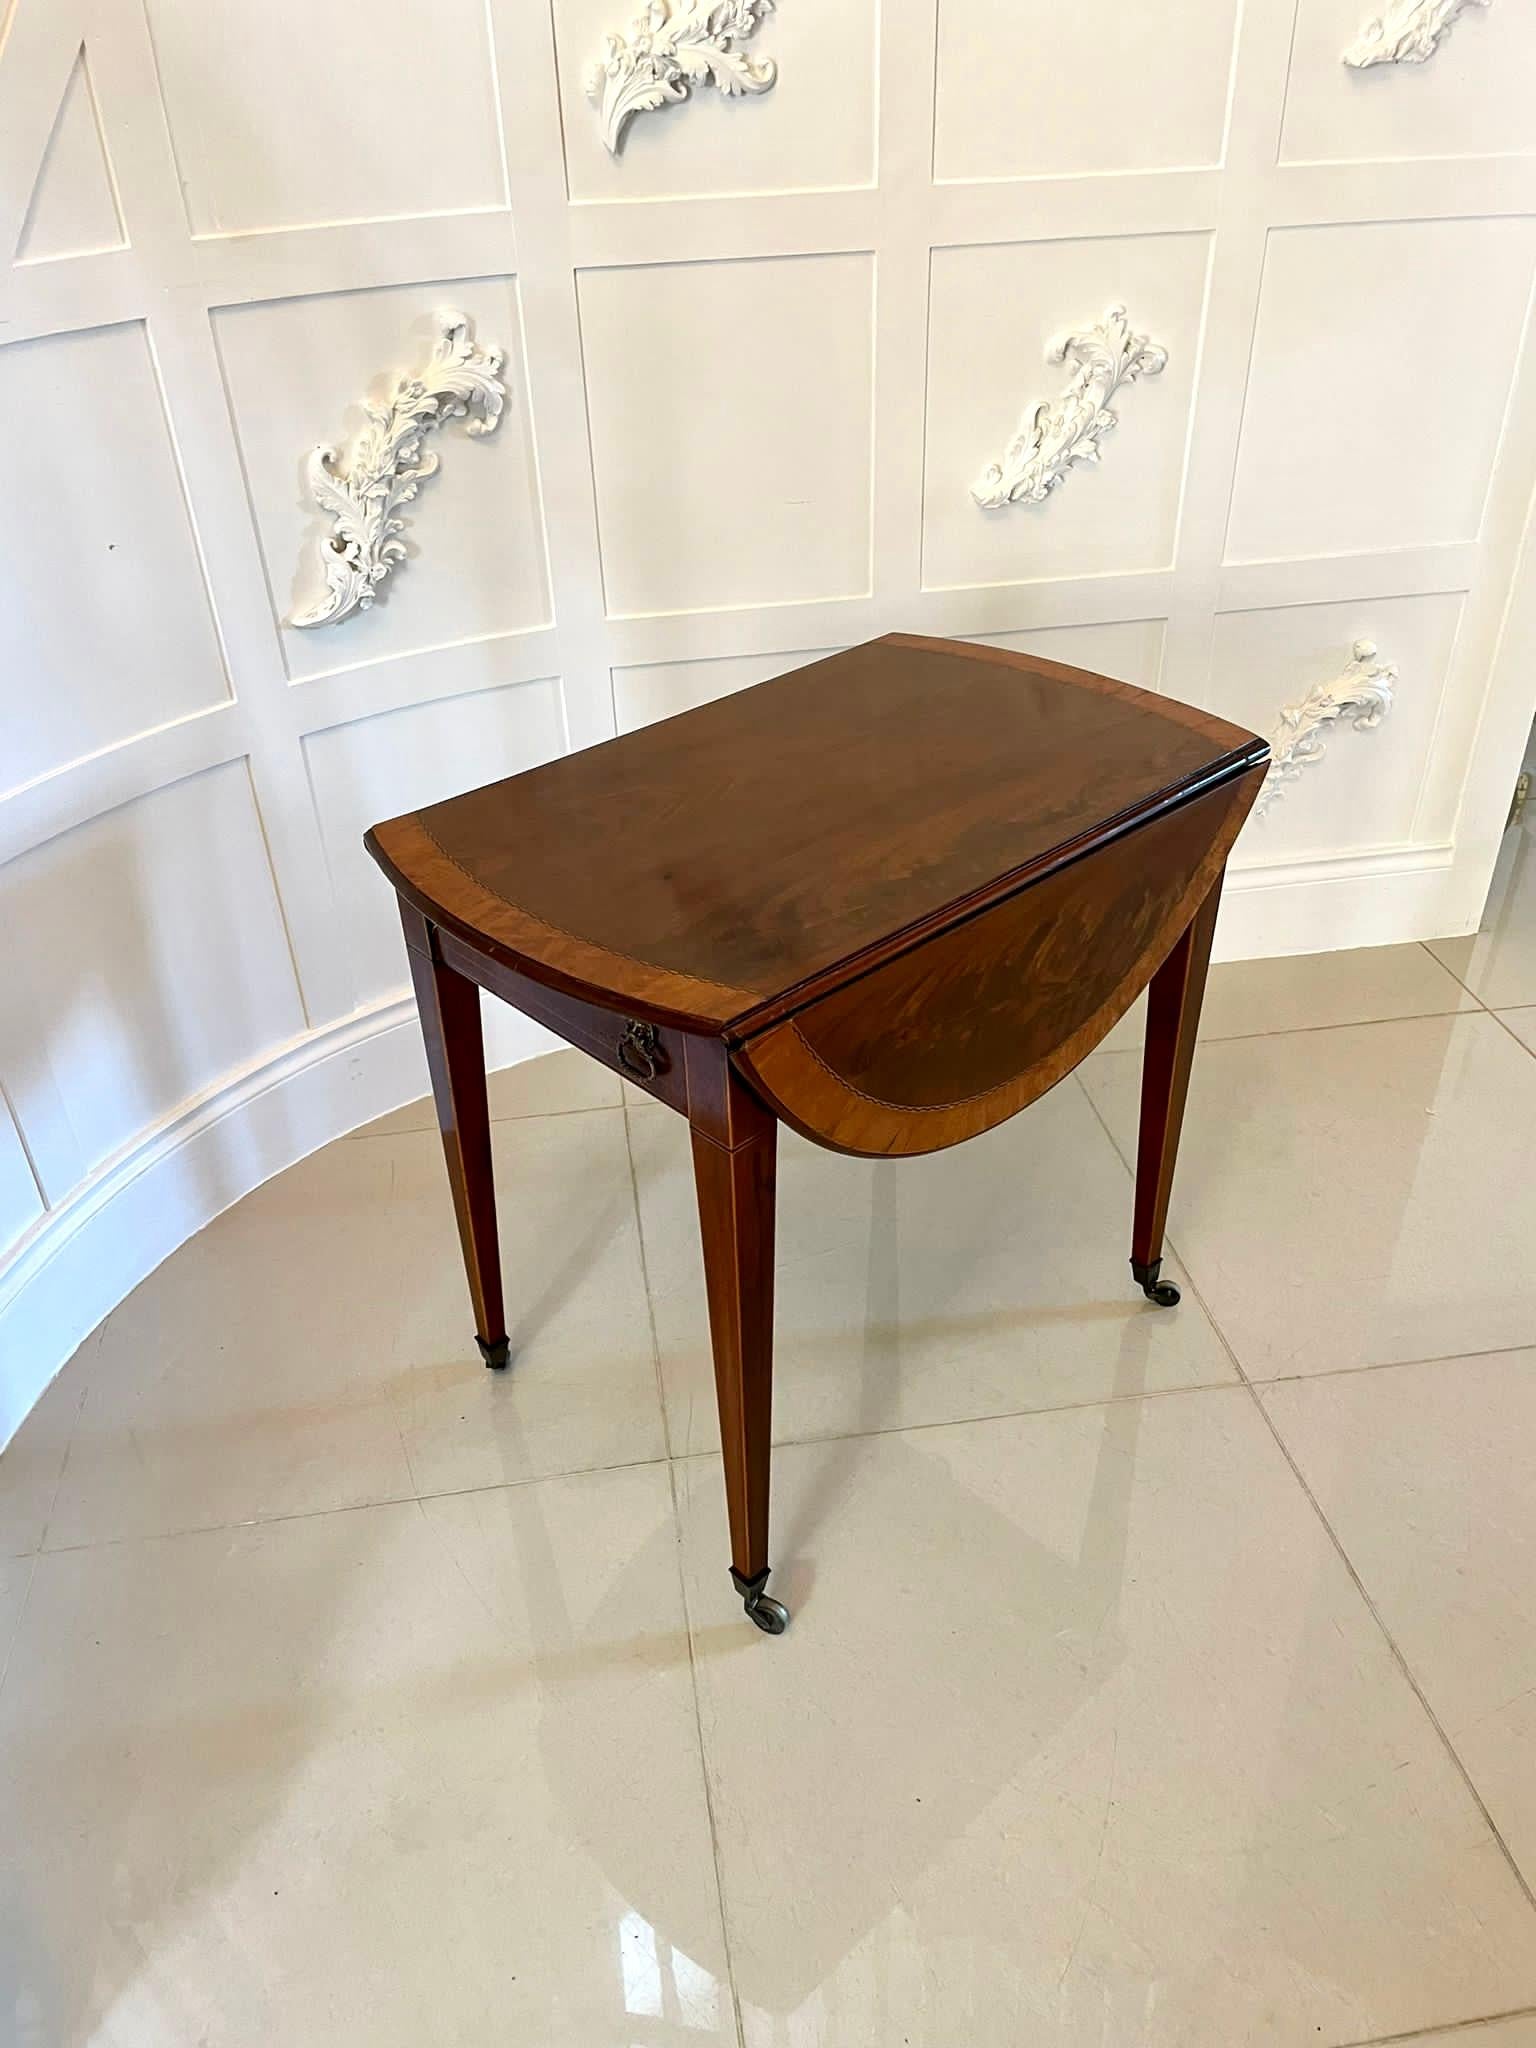 Fine quality Antique Sheraton period inlaid mahogany pembroke table having a quality mahogany top beautifully crossbanded in satinwood, two oval drop leaves, one drawer and one dummy drawer to the frieze with original brass handles. It stands on